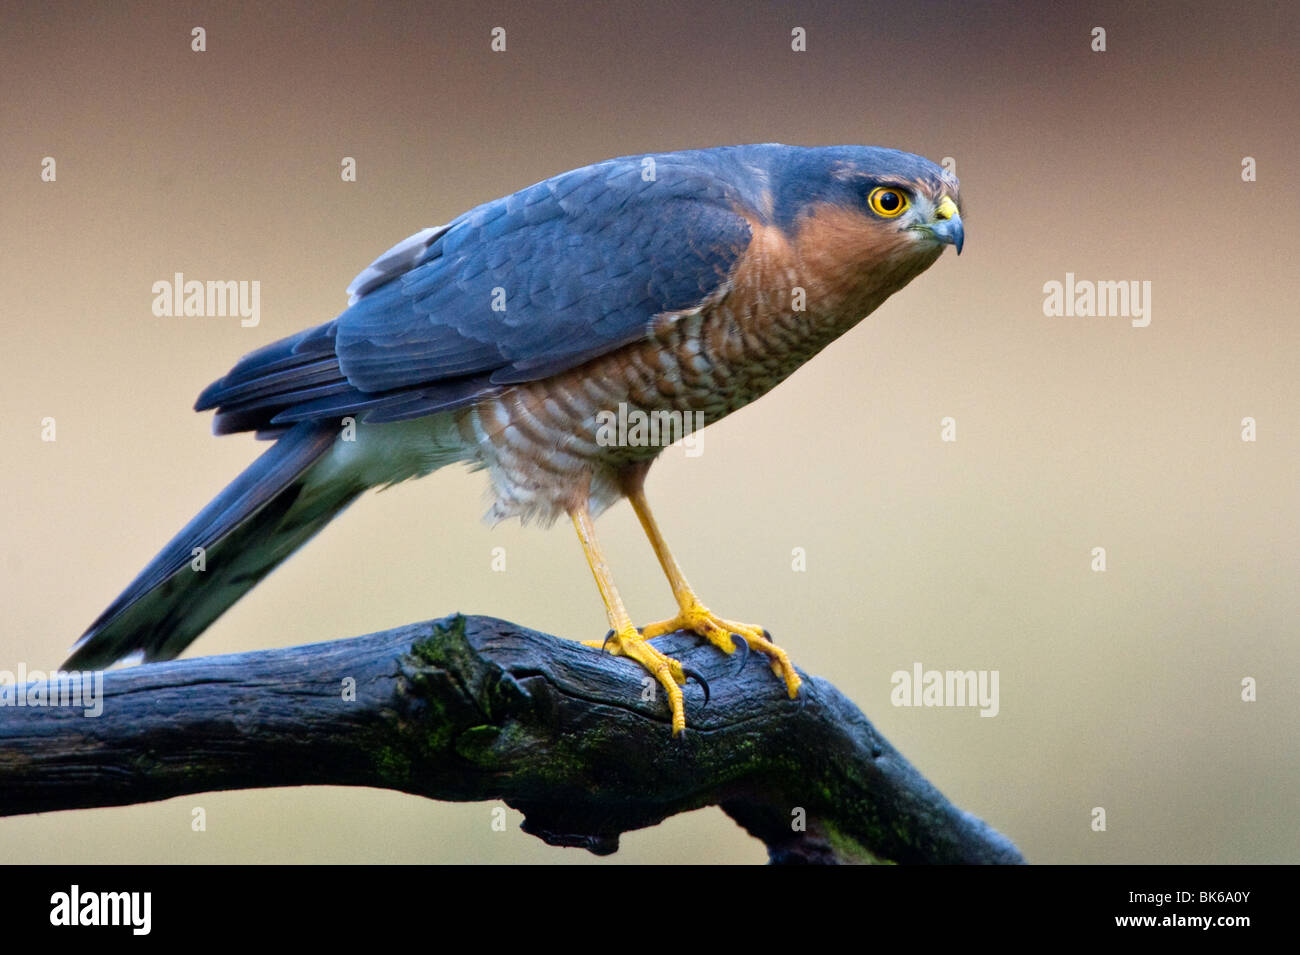 Portrait of a sparrowhawk perched on a branch Stock Photo